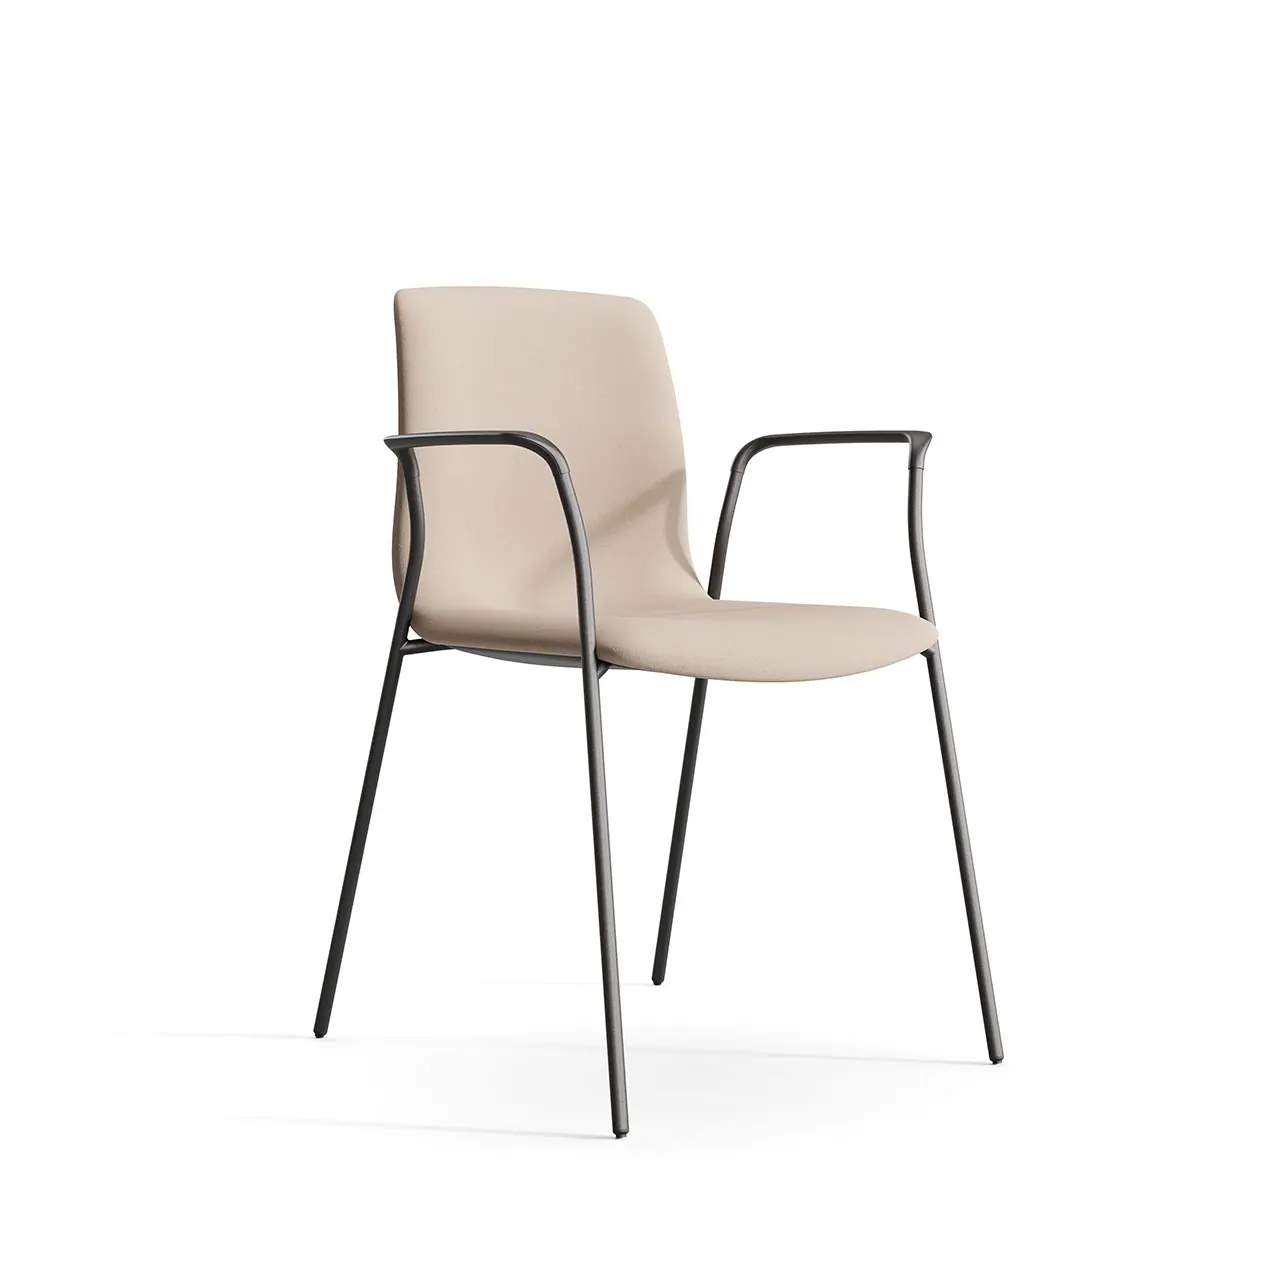 58339-58327-noom-serie-50-chair